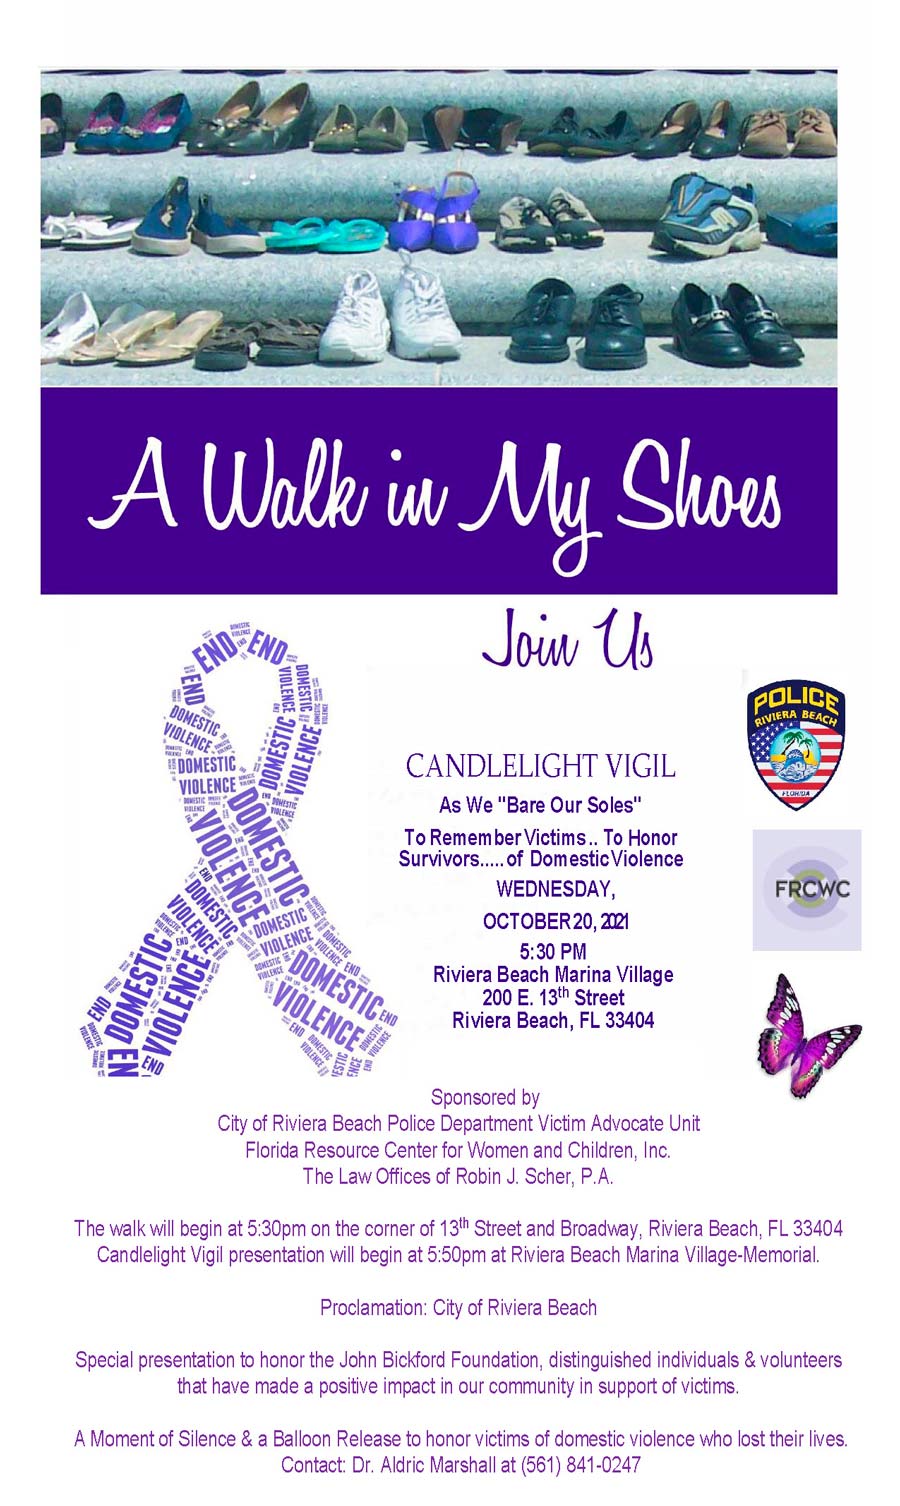 CANDLELIGHT VIGIL As We "Bare Our Soles" To RememberVictims.. To Honor Survivors.....of DomesticViolence WEDNESDAY, OCTOBER20,2021 5:30 PM Riviera Beach Marina Village 200 E. 13th Street Riviera Beach, FL 33404 Riviera Beach Marina Village 200 E. 13th Street Riviera Beach, FL 33404 Sponsored by City of Riviera Beach Police Department Victim Advocate Unit Florida Resource Center for Women and Children, Inc. The Law Offices of Robin J. Scher, P.A. The walk will begin at 5:30pm on the corner of 13th Street and Broadway, Riviera Beach, FL 33404 Candlelight Vigil presentation will begin at 5:50pm at Riviera Beach Marina Village-Memorial. Proclamation: City of Riviera Beach Special presentation to honor the John Bickford Foundation, distinguished individuals & volunteers that have made a positive impact in our community in support of victims. A Moment of Silence & a Balloon Release to honor victims of domestic violence